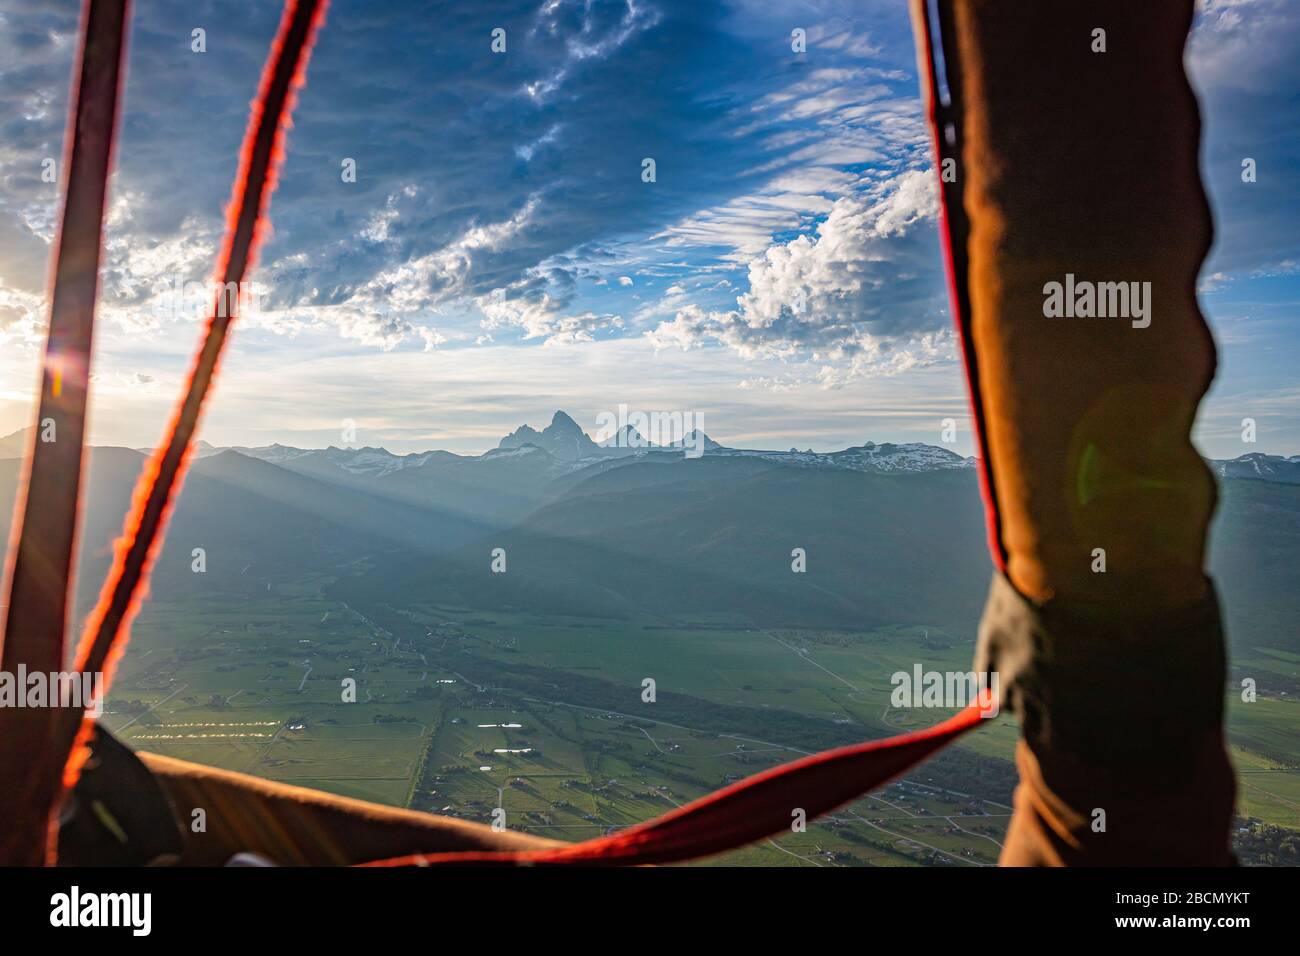 A hot air balloon view from Driggs, Idaho of the Grand Tetons  in the Rocky Mountains of Wyoming. Stock Photo